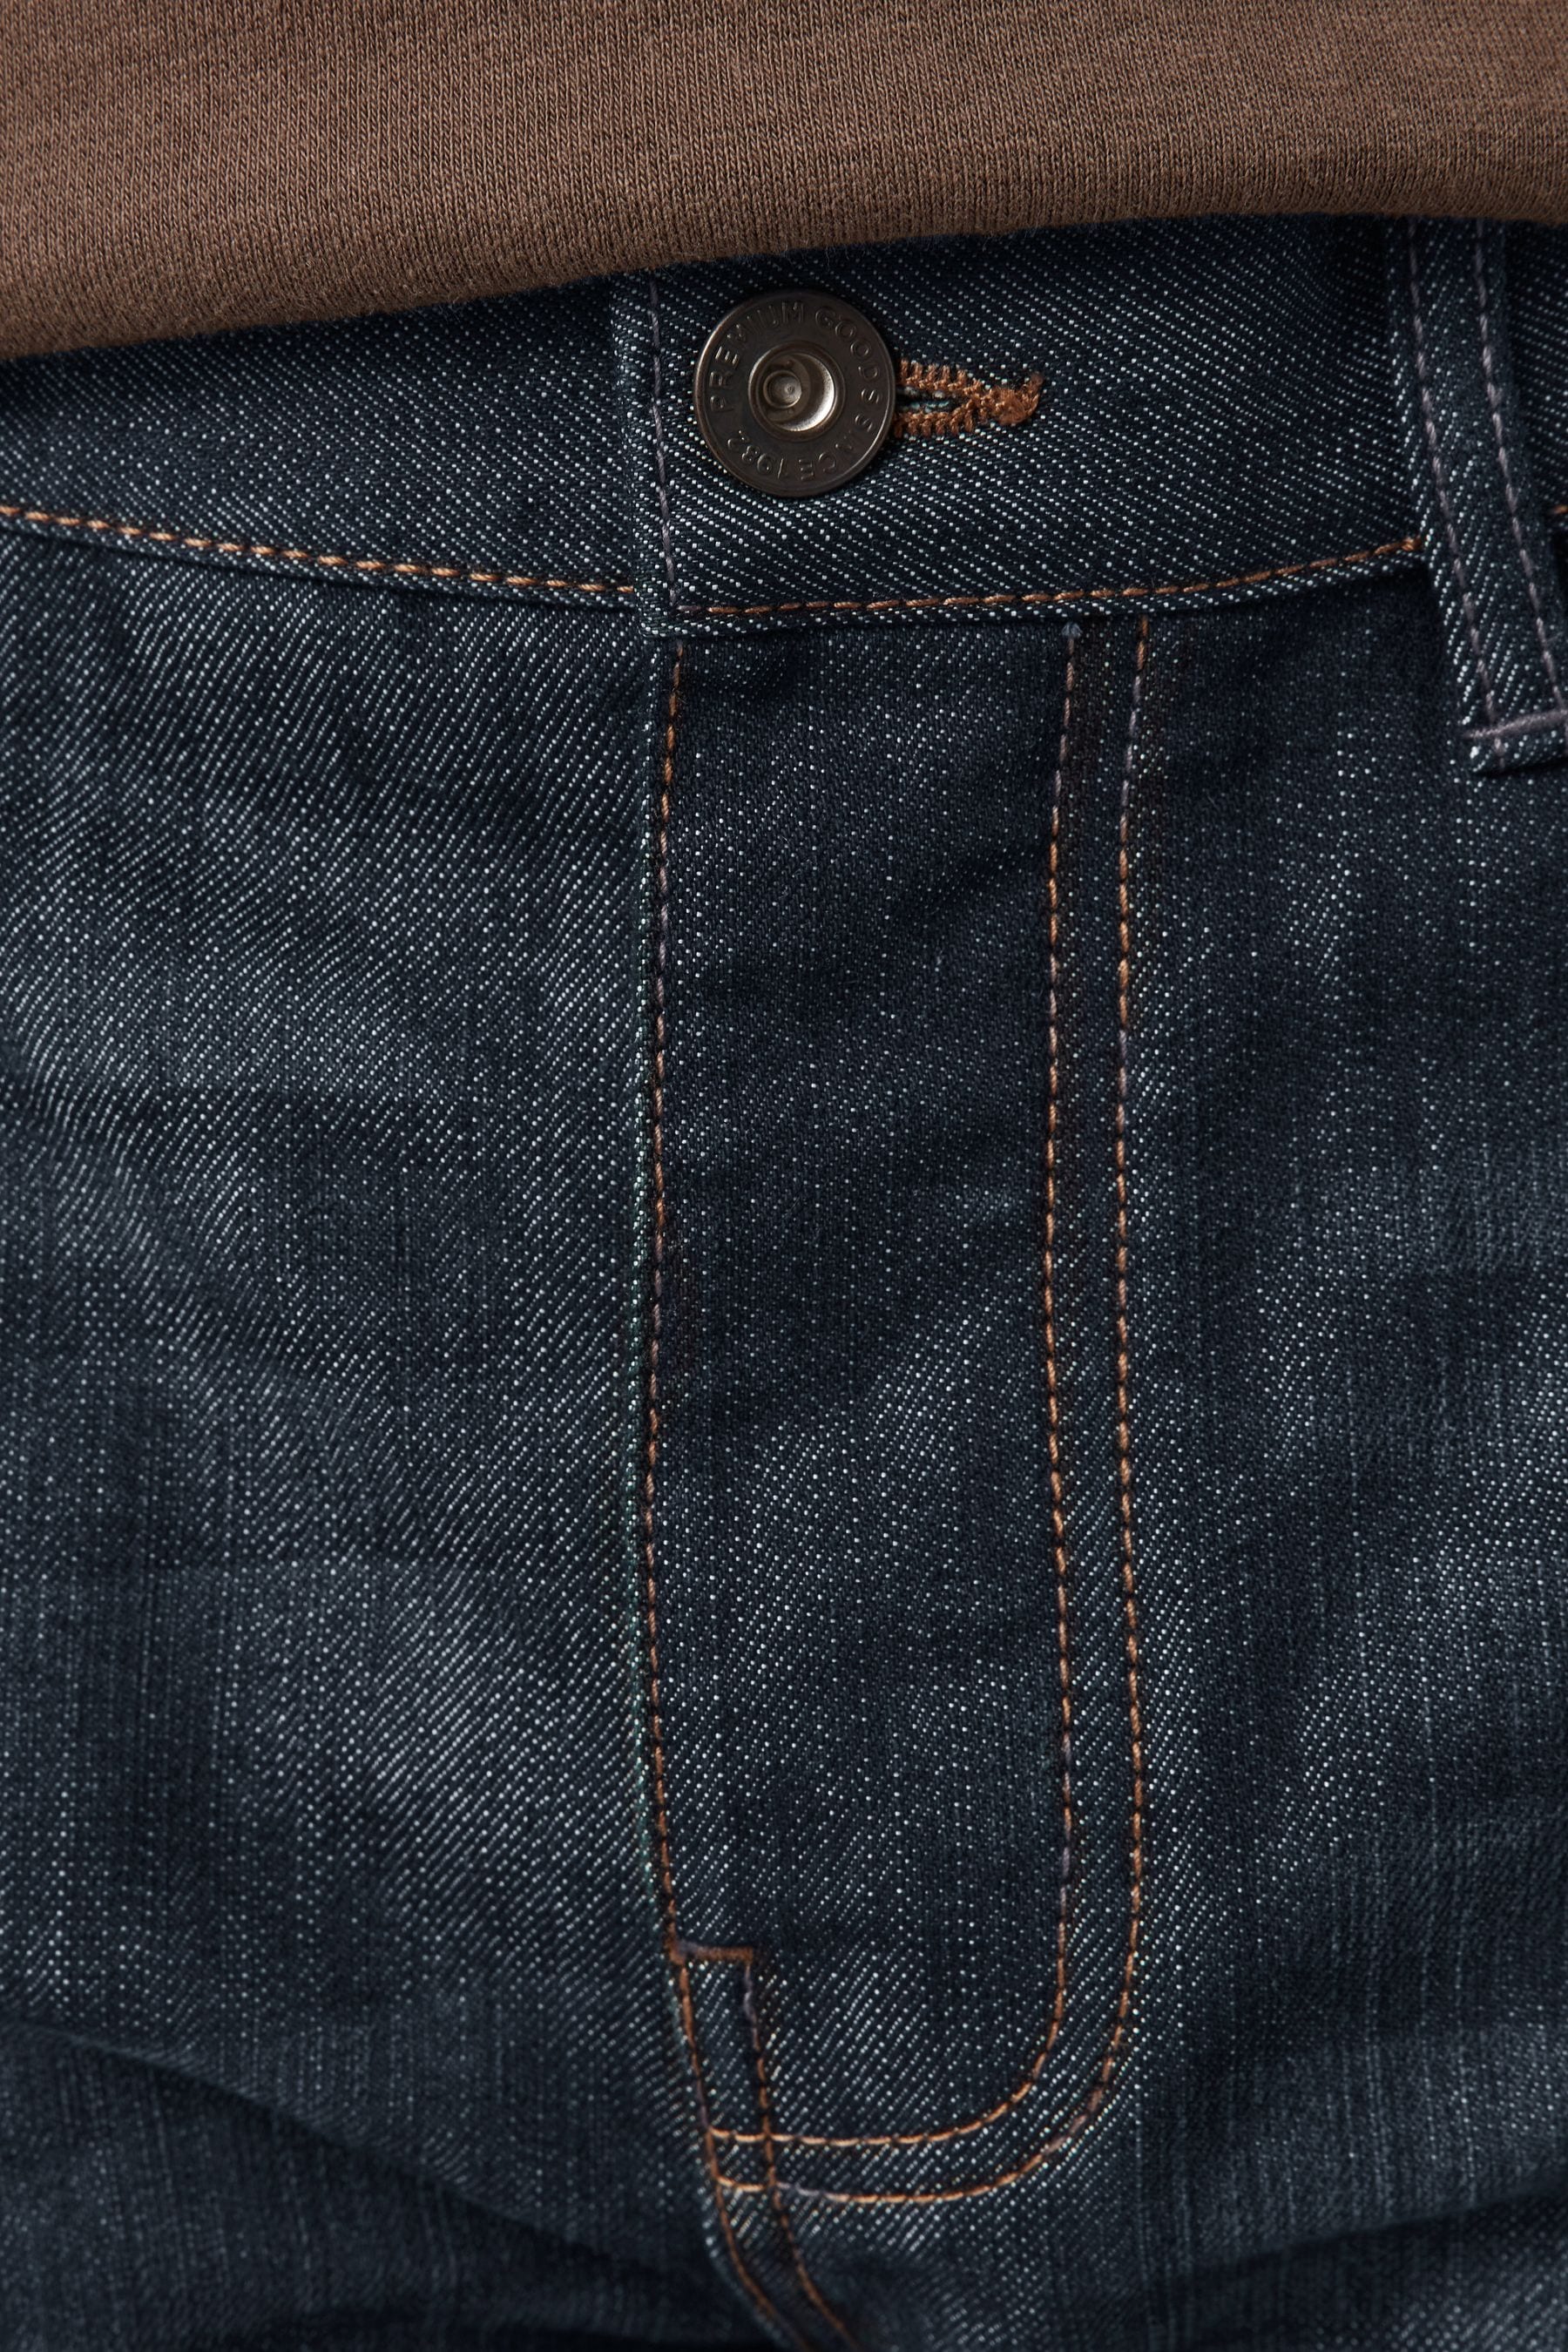 Buy Dark Ink Blue Cotton Bootcut Jeans from the Next UK online shop